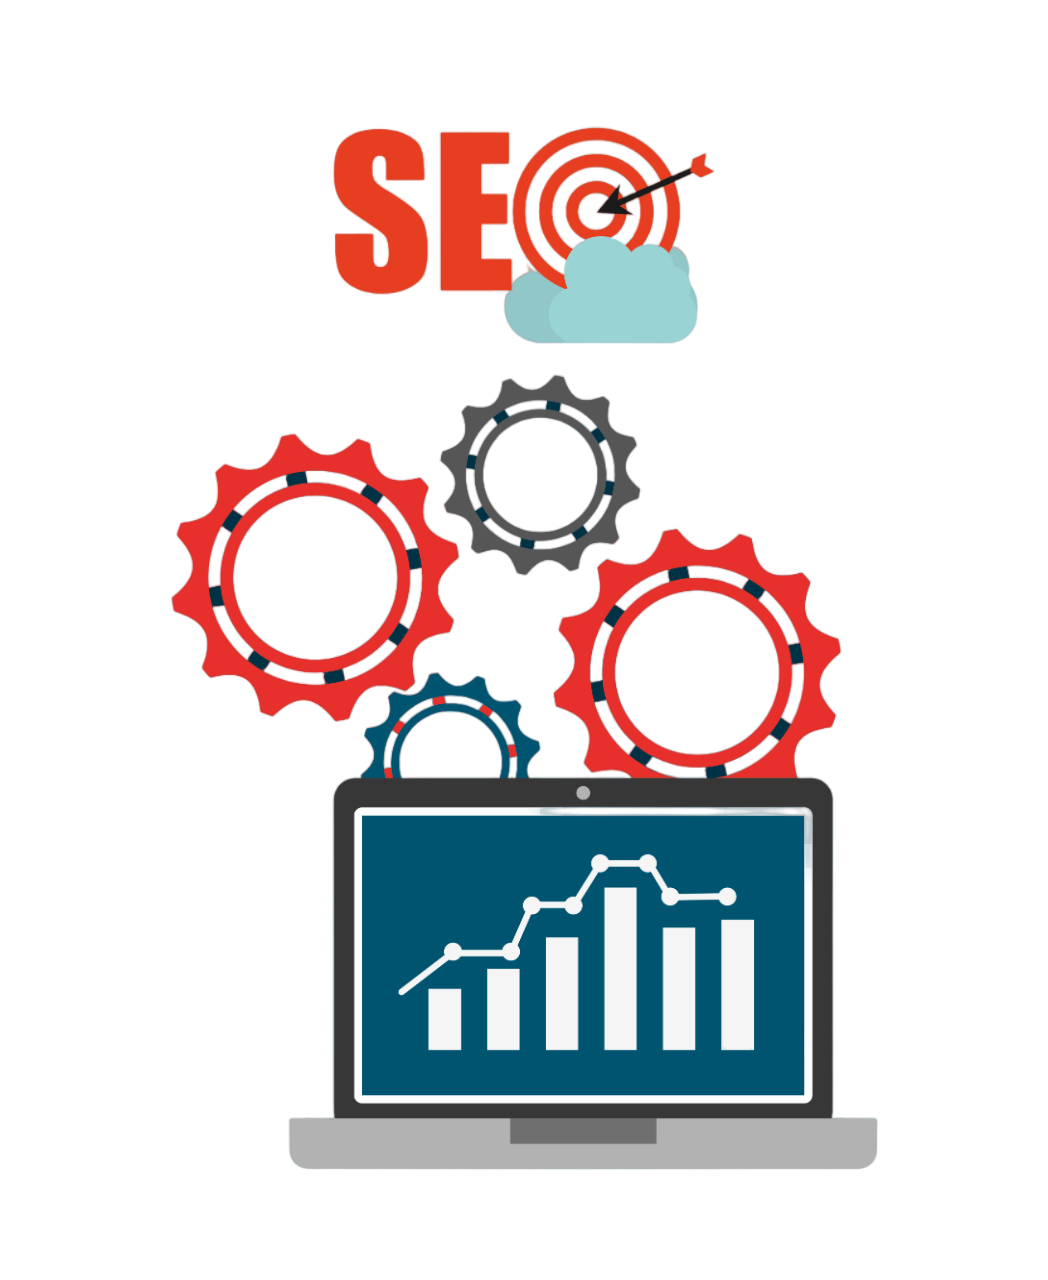 About Seo Image 6